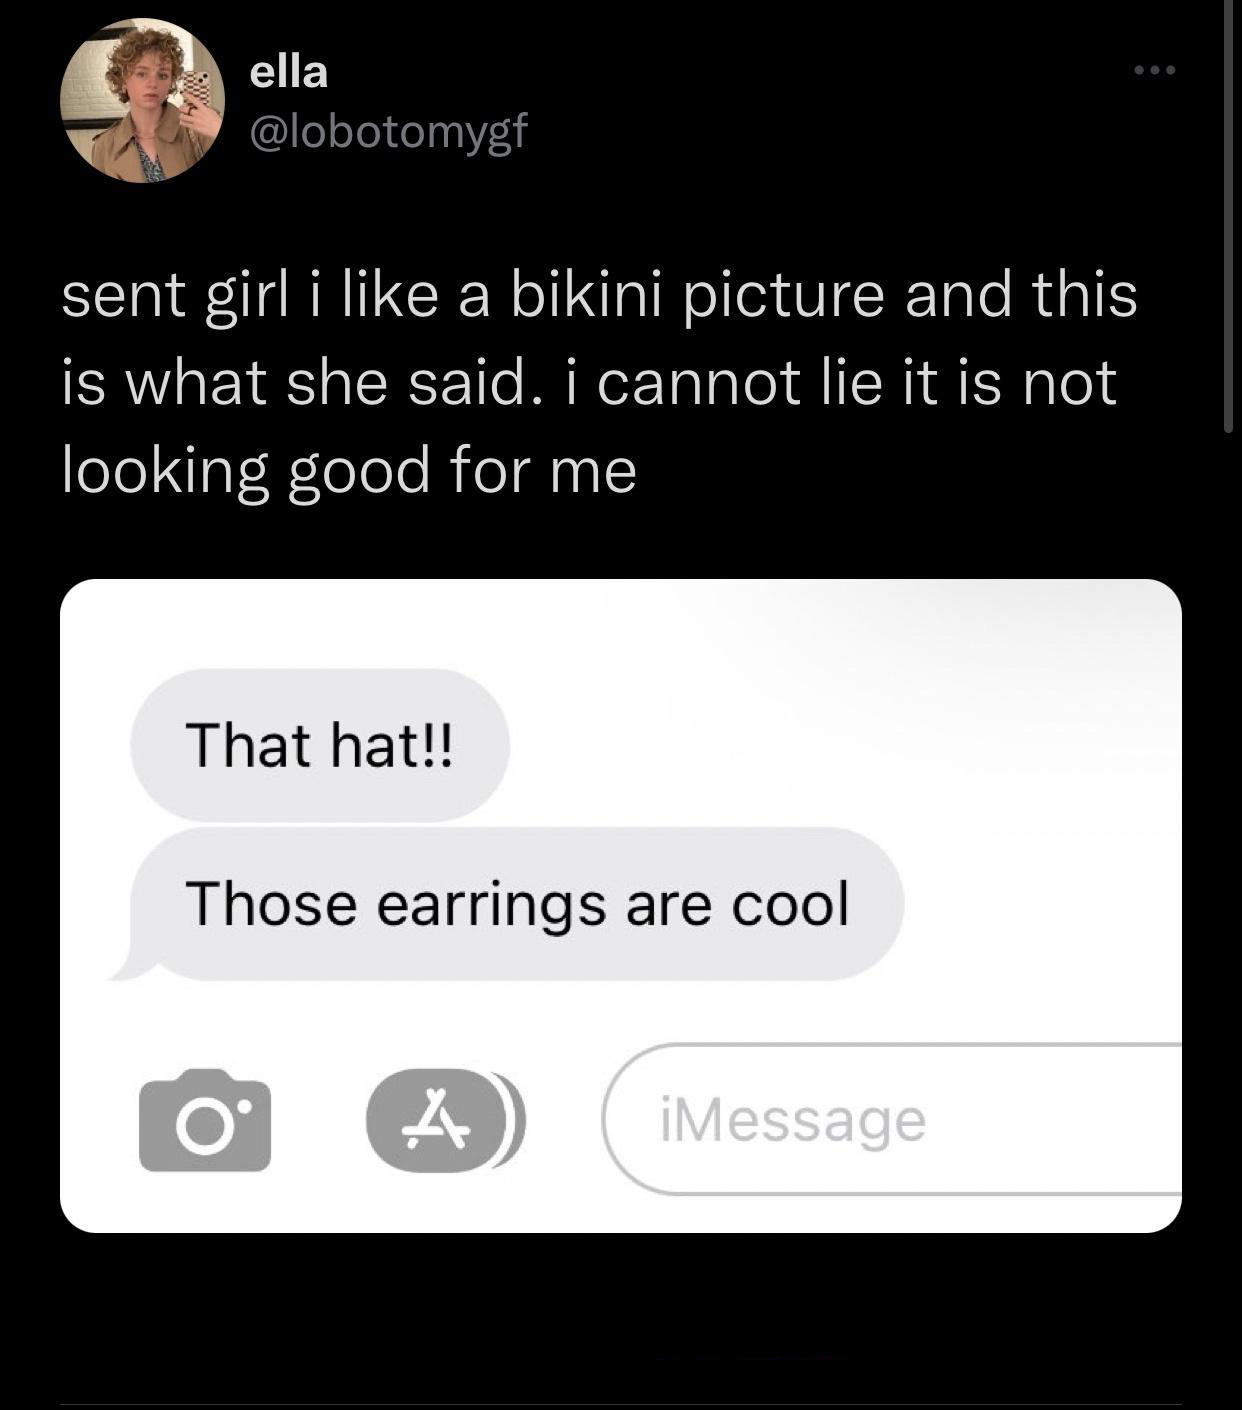 funniest tweets - multimedia - ella sent girl i a bikini picture and this is what she said. i cannot lie it is not looking good for me That hat!! Those earrings are cool A iMessage